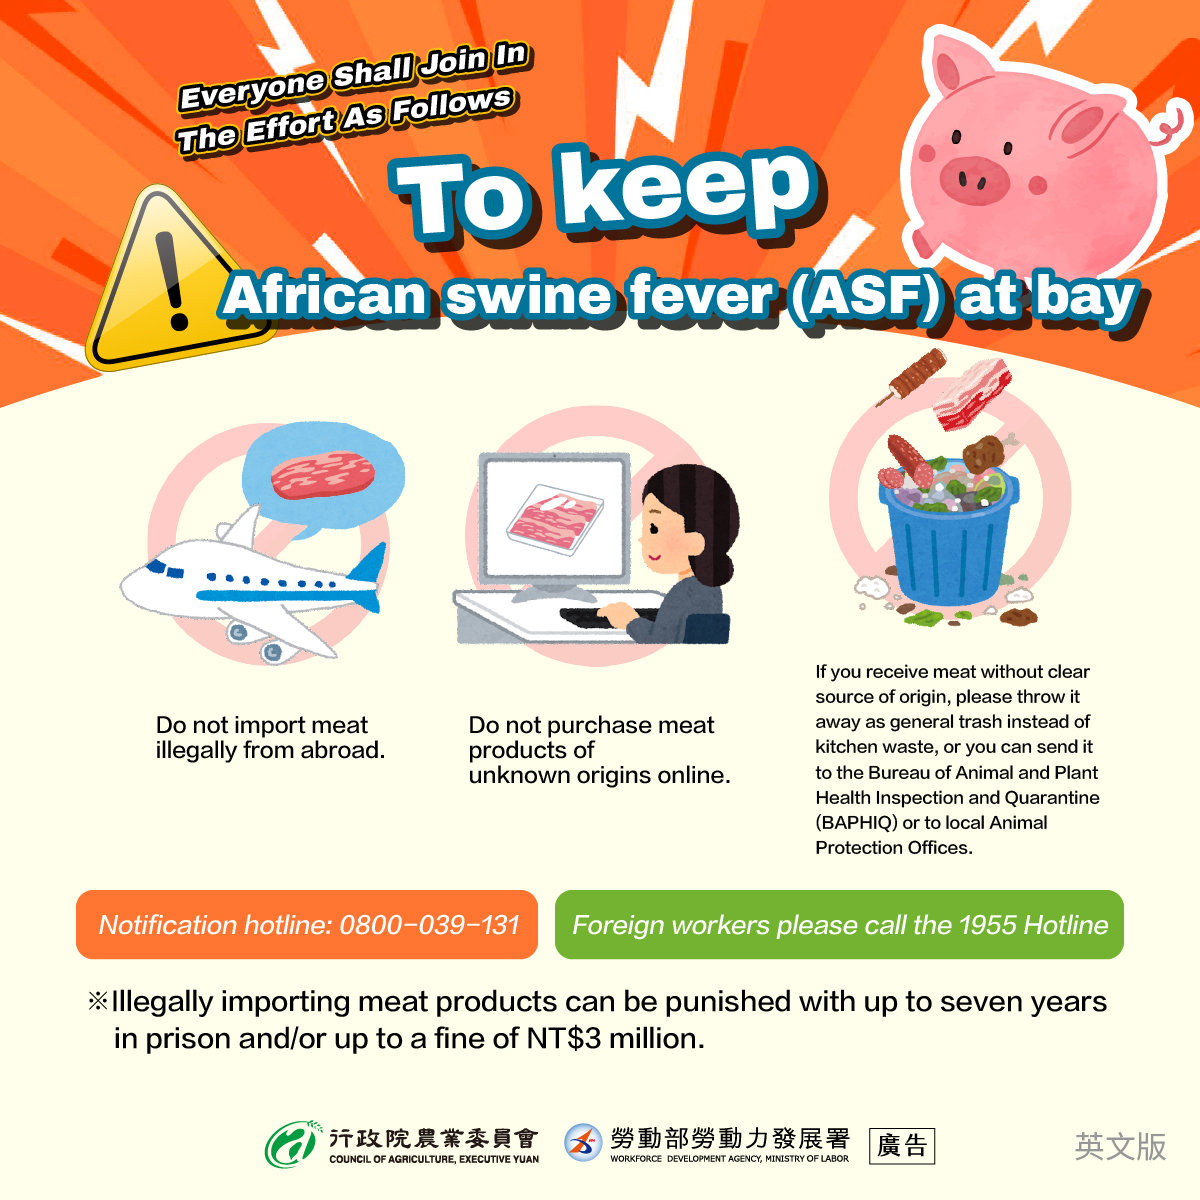 Leaflet on prevention of African swine fever. (Photo/provided by the Workforce Development Agency, Ministry of Labor)